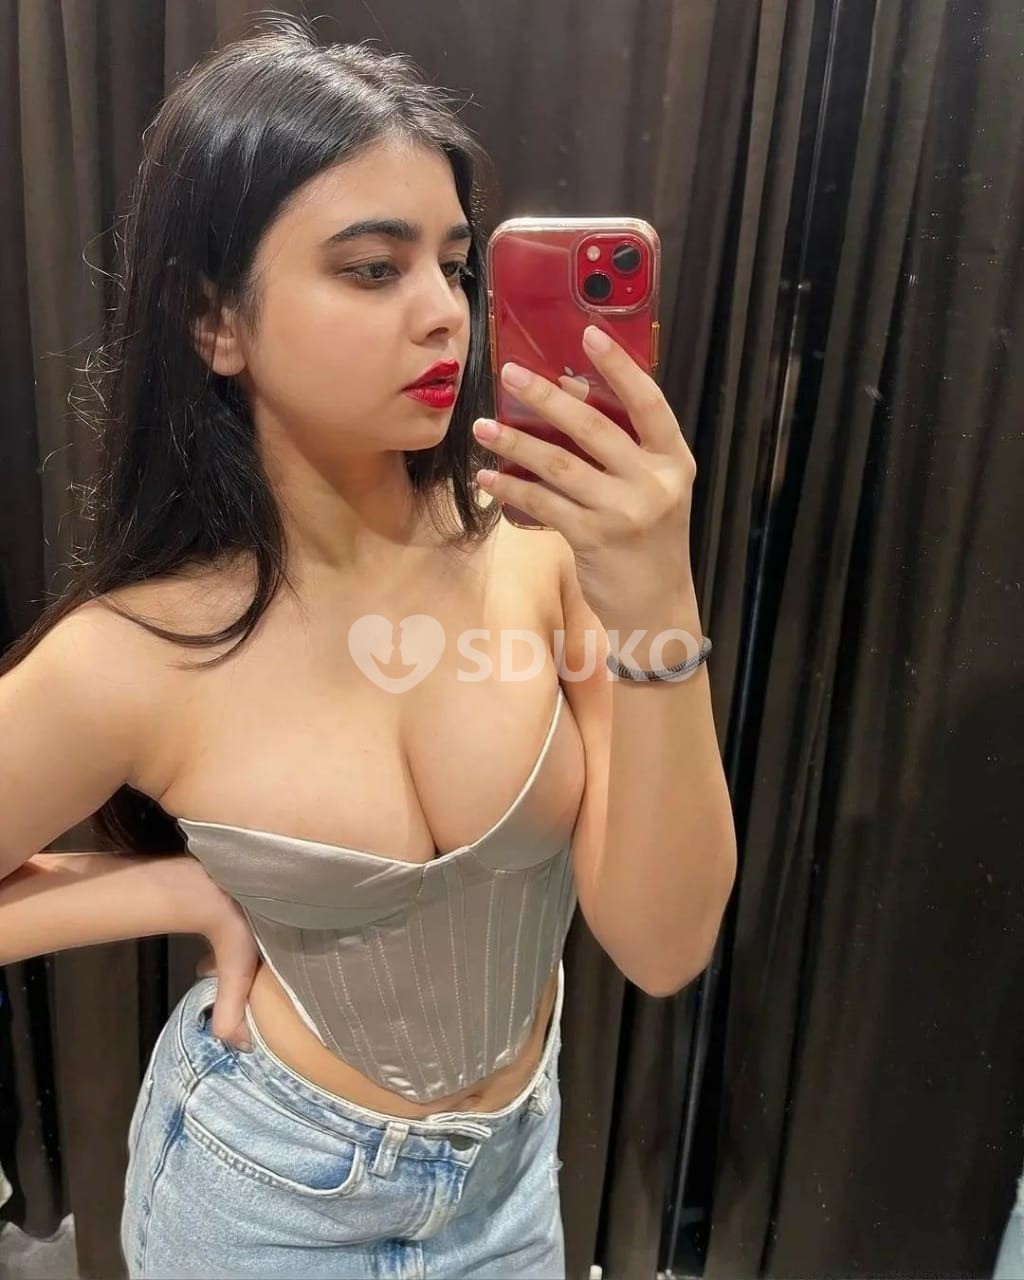 PUNE ALL AREA VIP TODAY :/LOW PRICE ESCORT 🥰SERVICE 100% SAFE AND SECURE ANYTIME CALL ME 24 X 7 SERVICE AVAILABLE 100